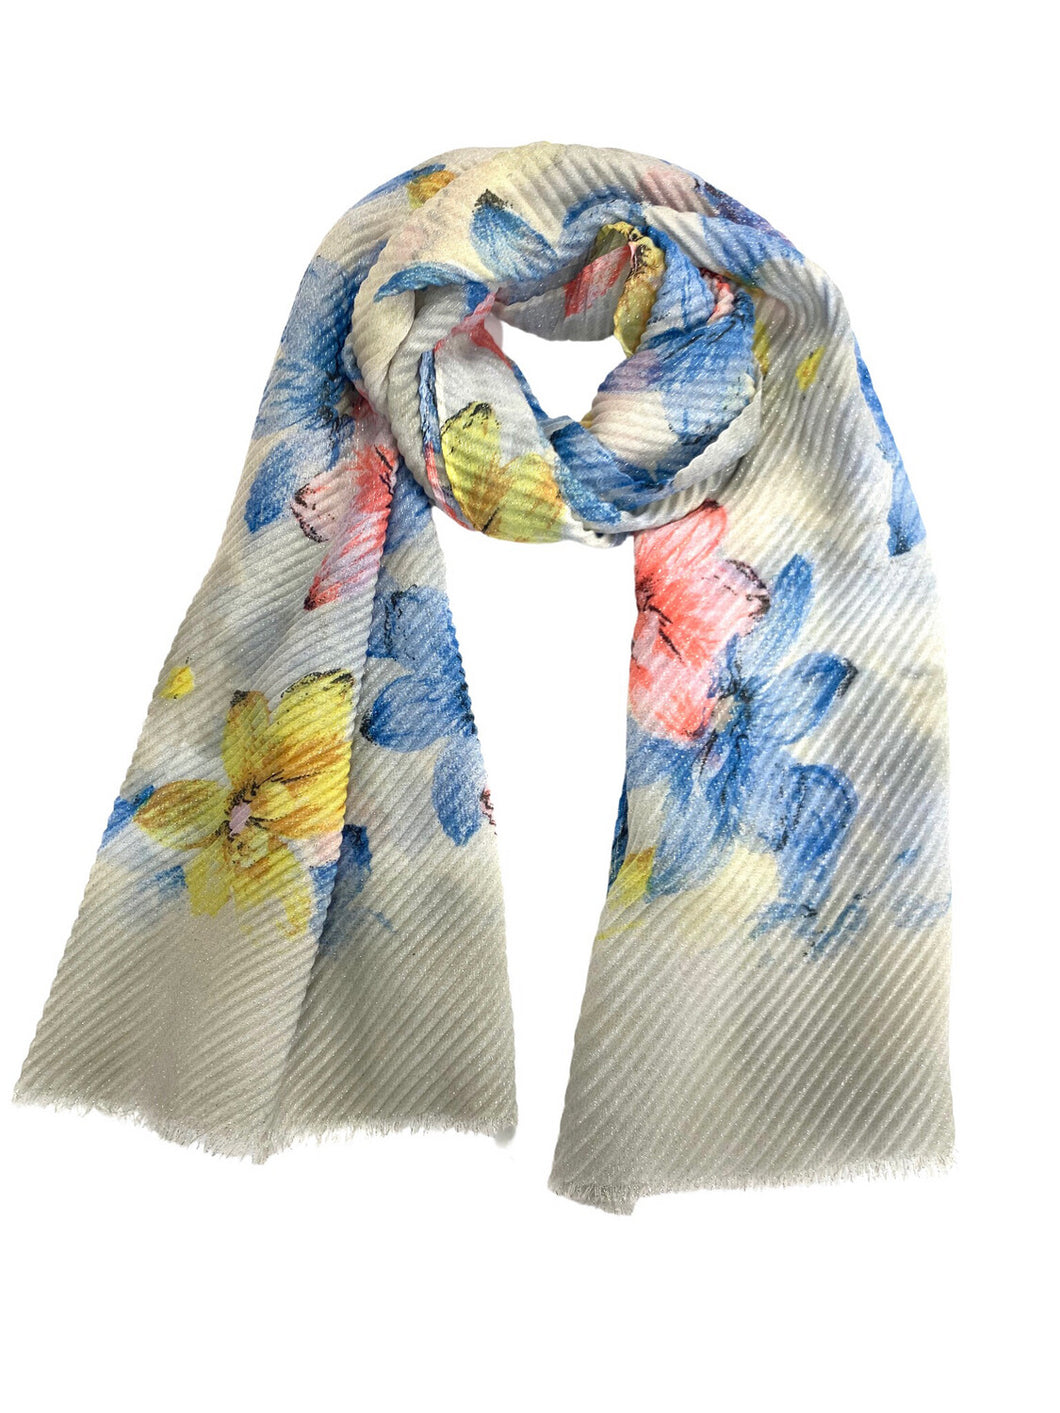 Scarf - Pleated with Frayed Edges - Blue/Yellow Florals on Sparkling Silver